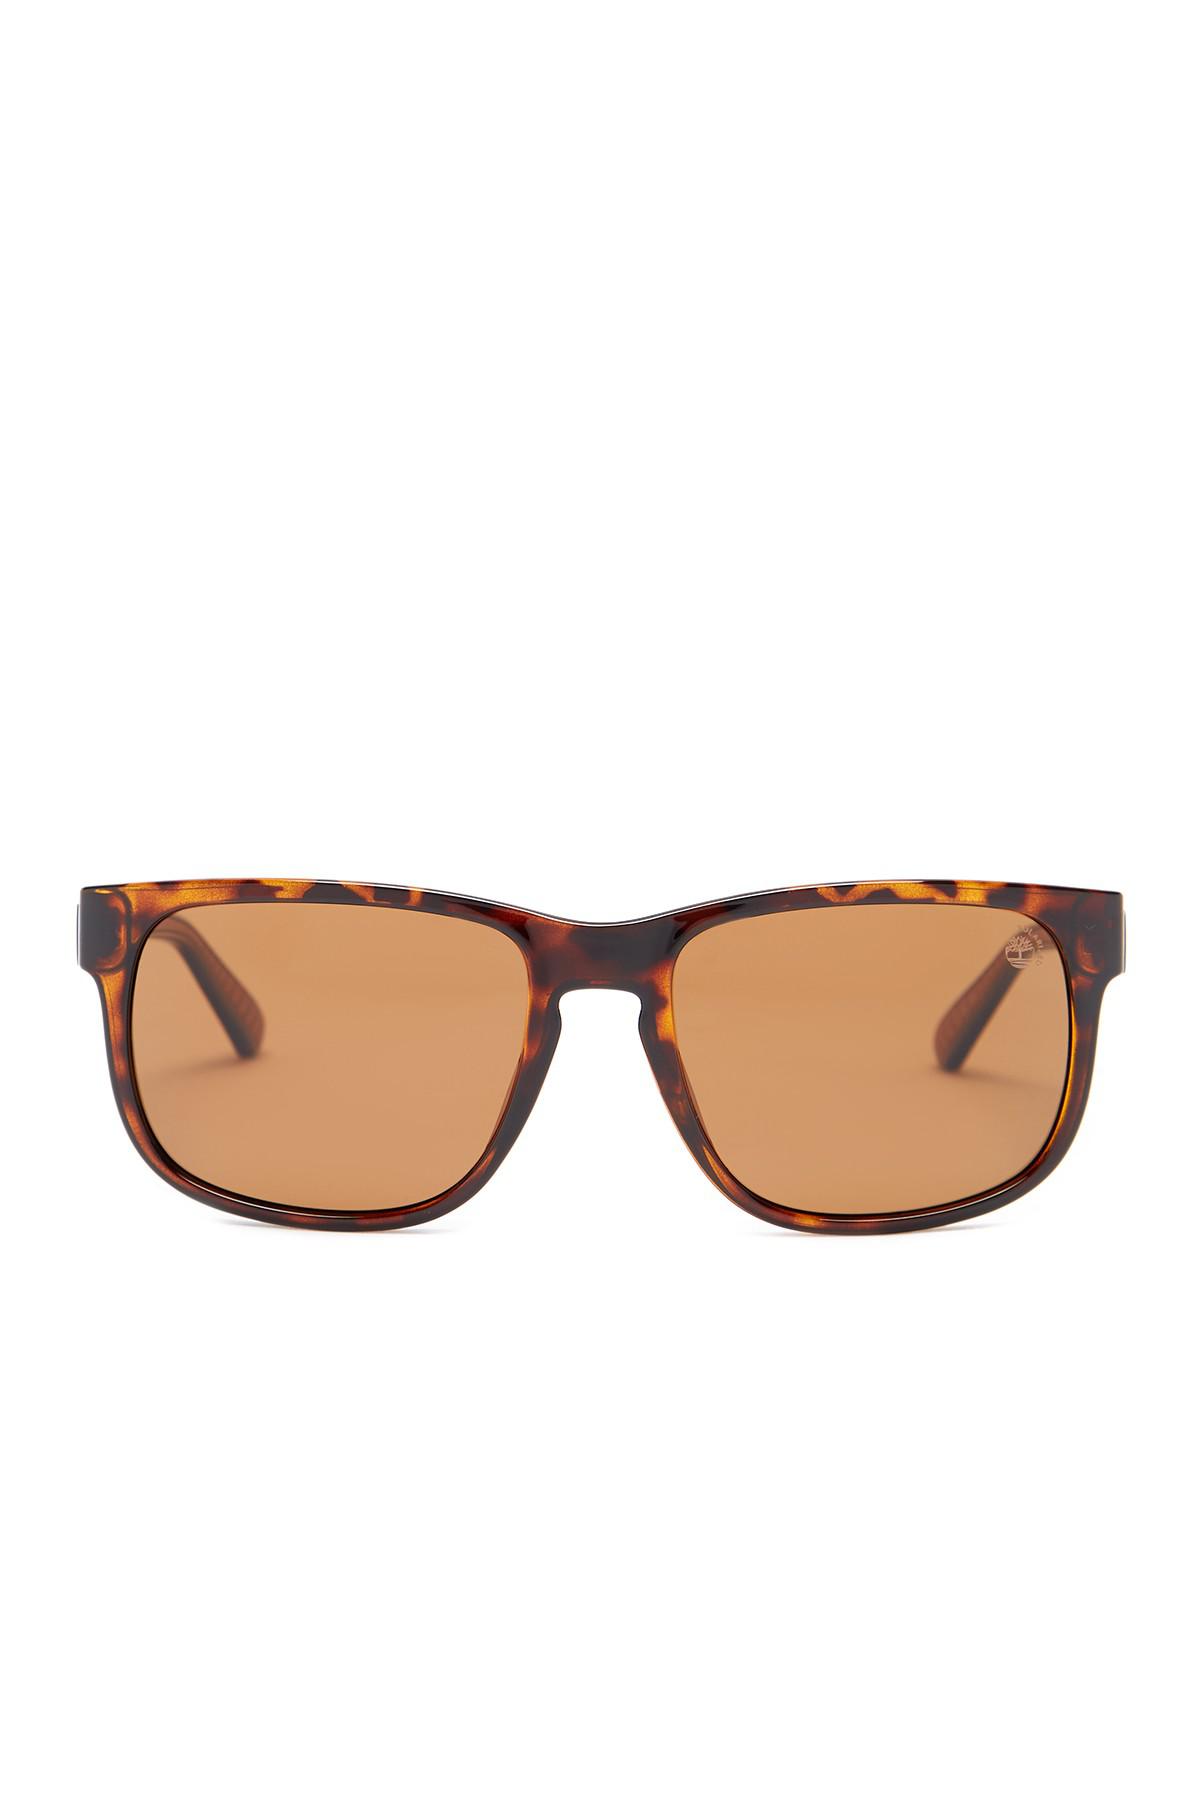 Lyst - Timberland Polarized 57mm Retro Sunglasses in Brown for Men